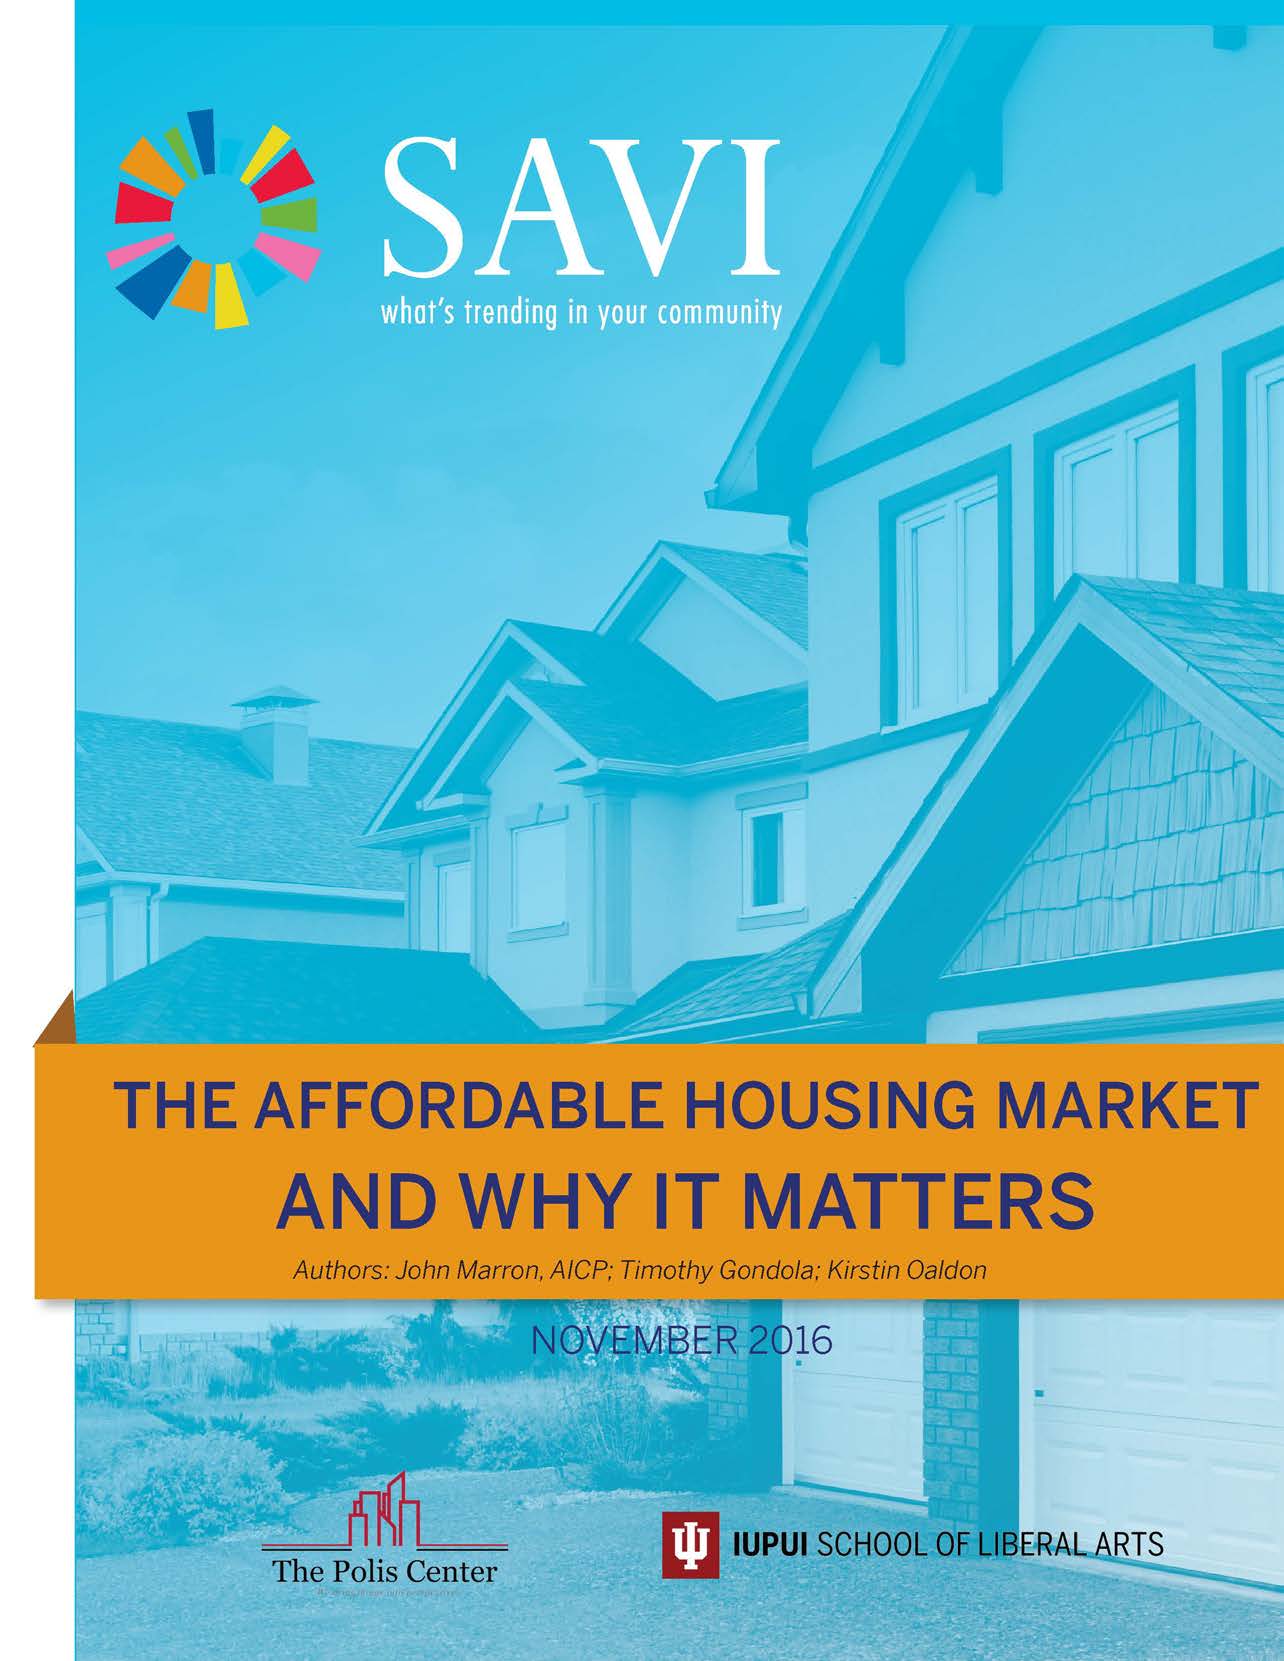 The Affordable Housing Market and Why It Matters